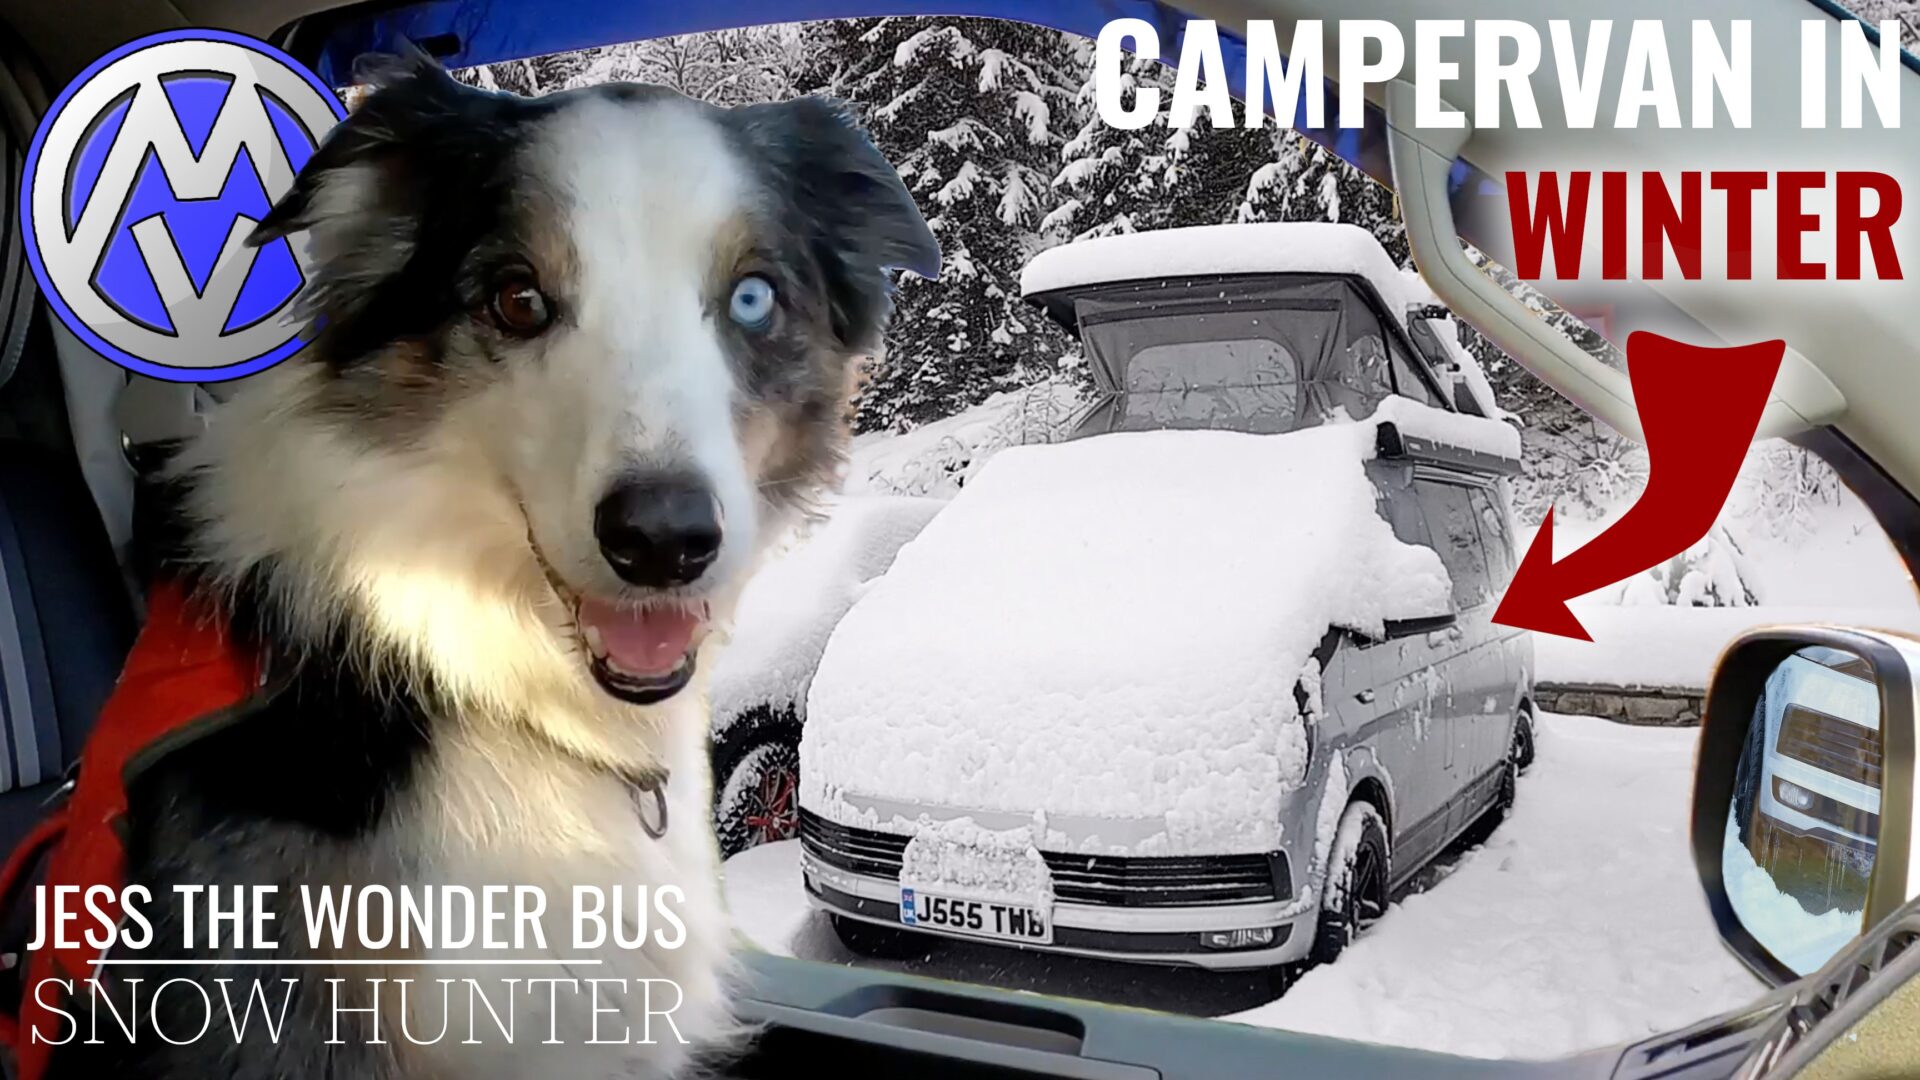 Winter Campervan | Snow Hunter | VW T6 Campervan Road Trip to the Alps with Dog